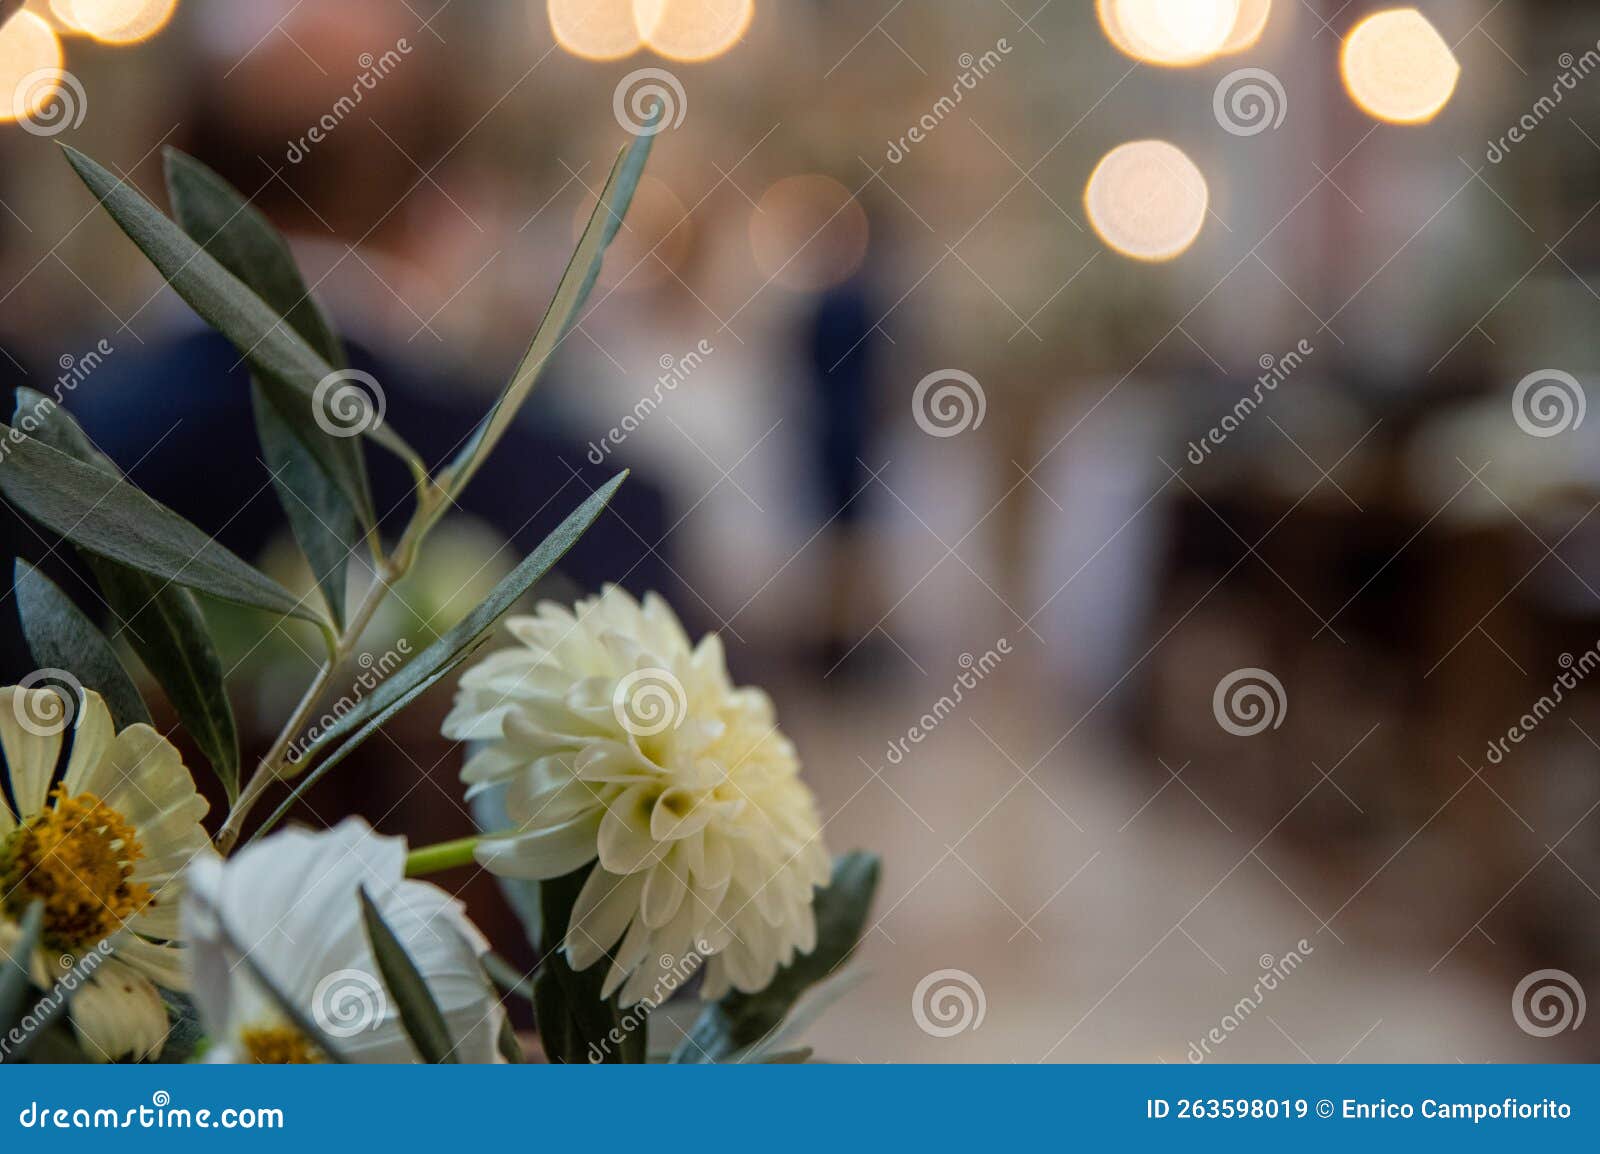 chrysanthemums, daises and olive leafs bouquet